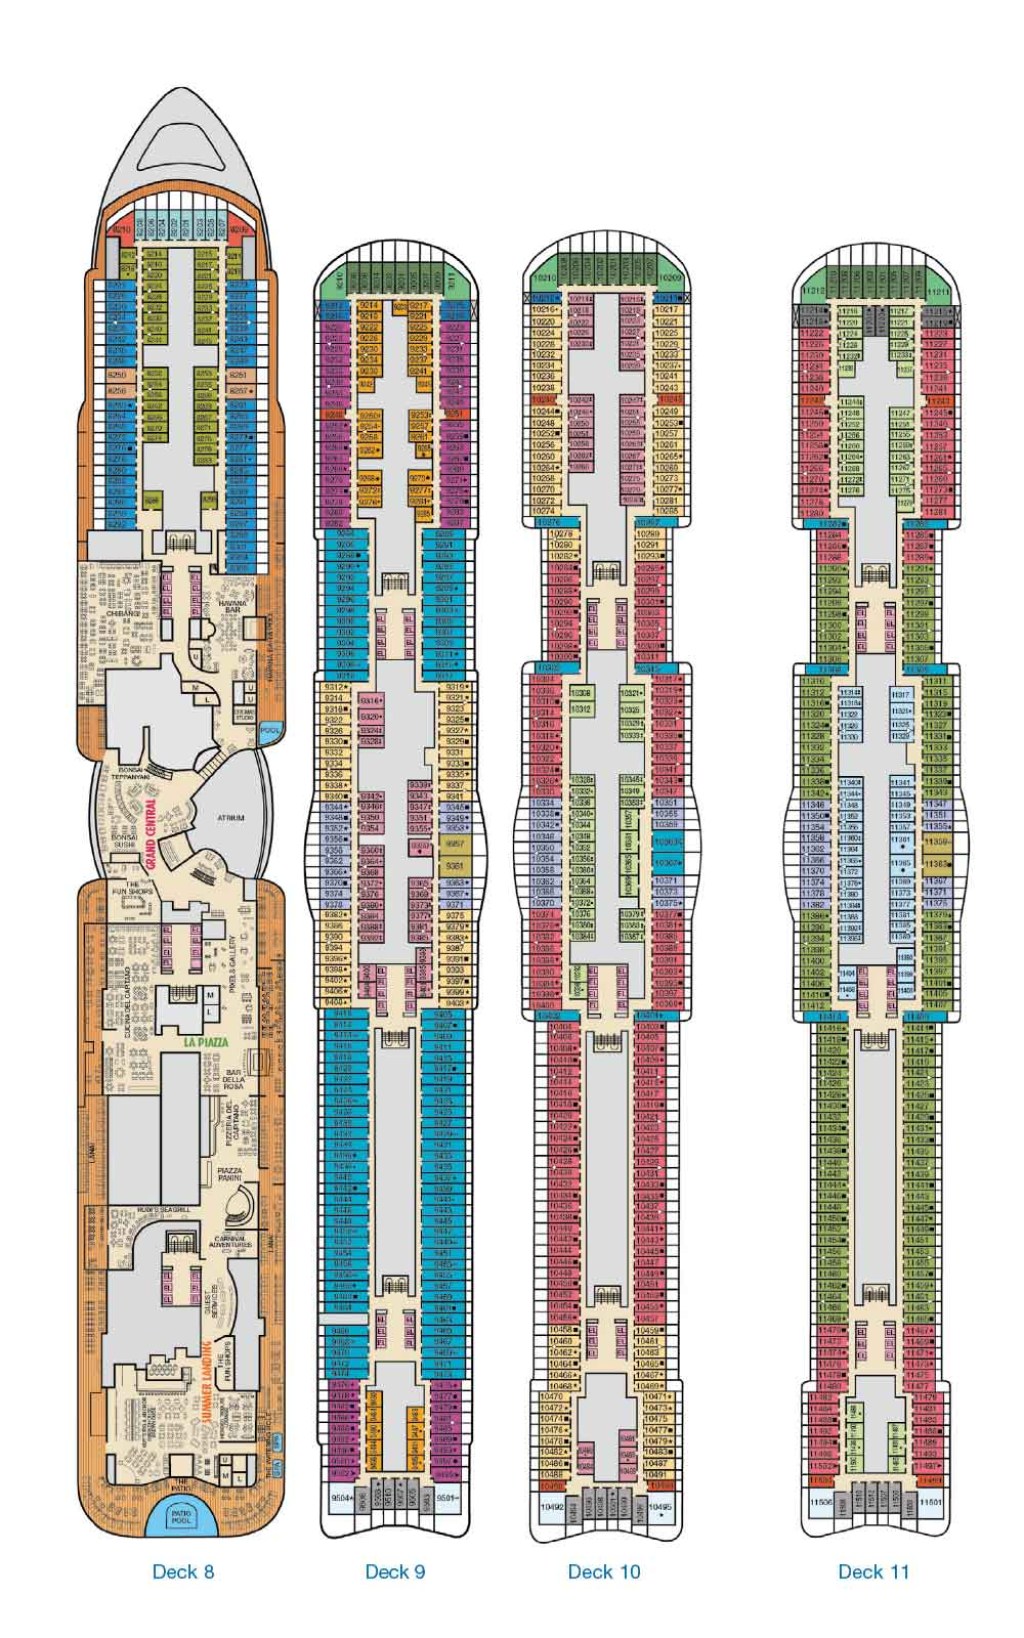 Picture of: Carnival Mardi Gras Deck Plans  Carnival Cruise Line